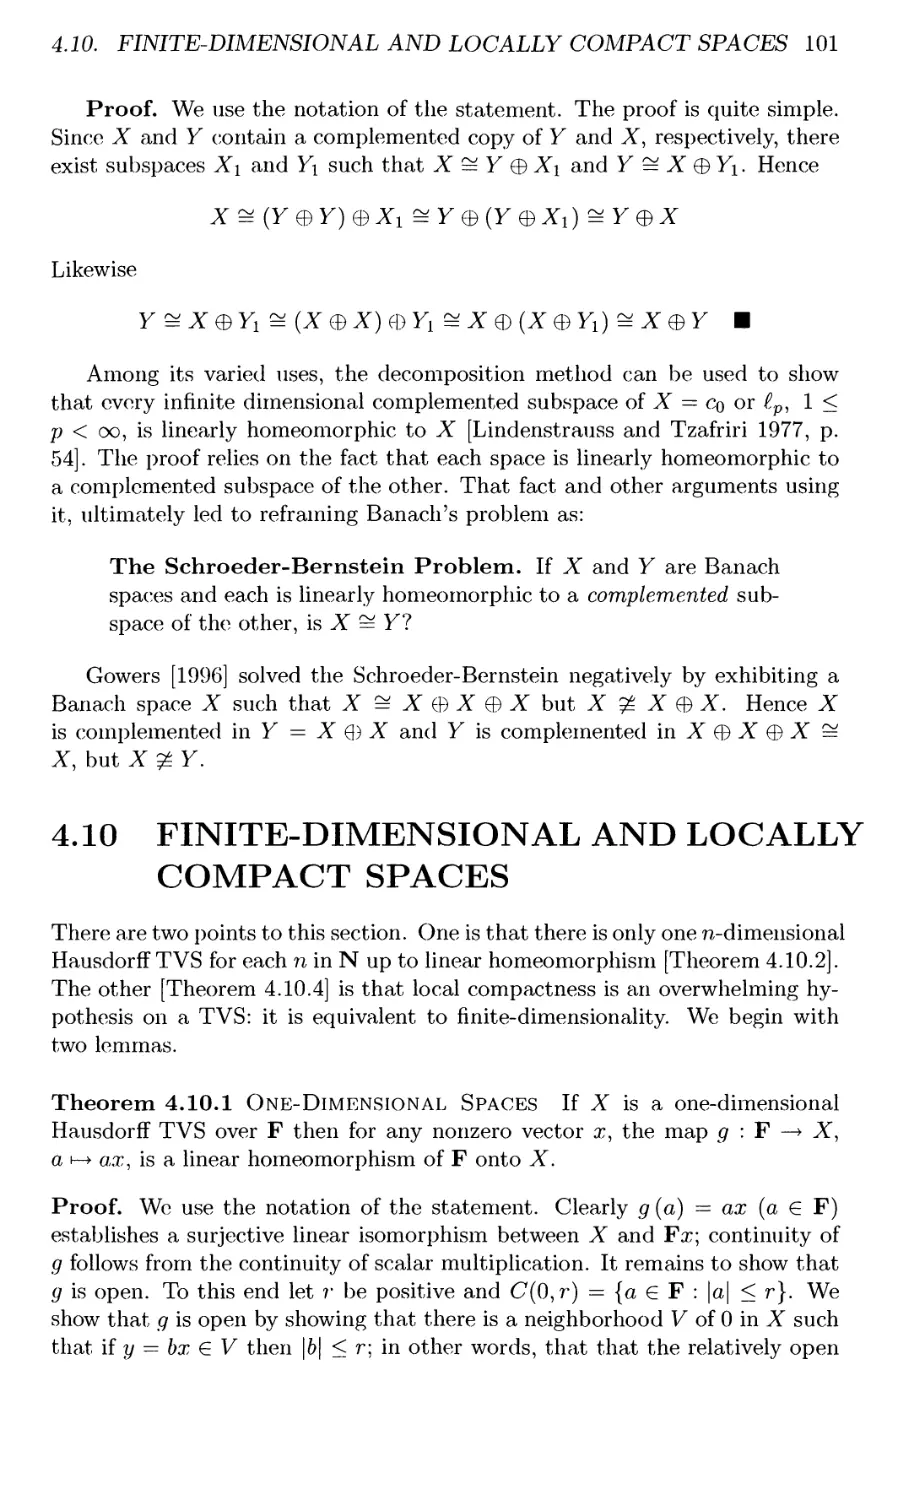 4.10 FINITE-DIMENSIONAL AND LOCALLY COMPACT SPACES